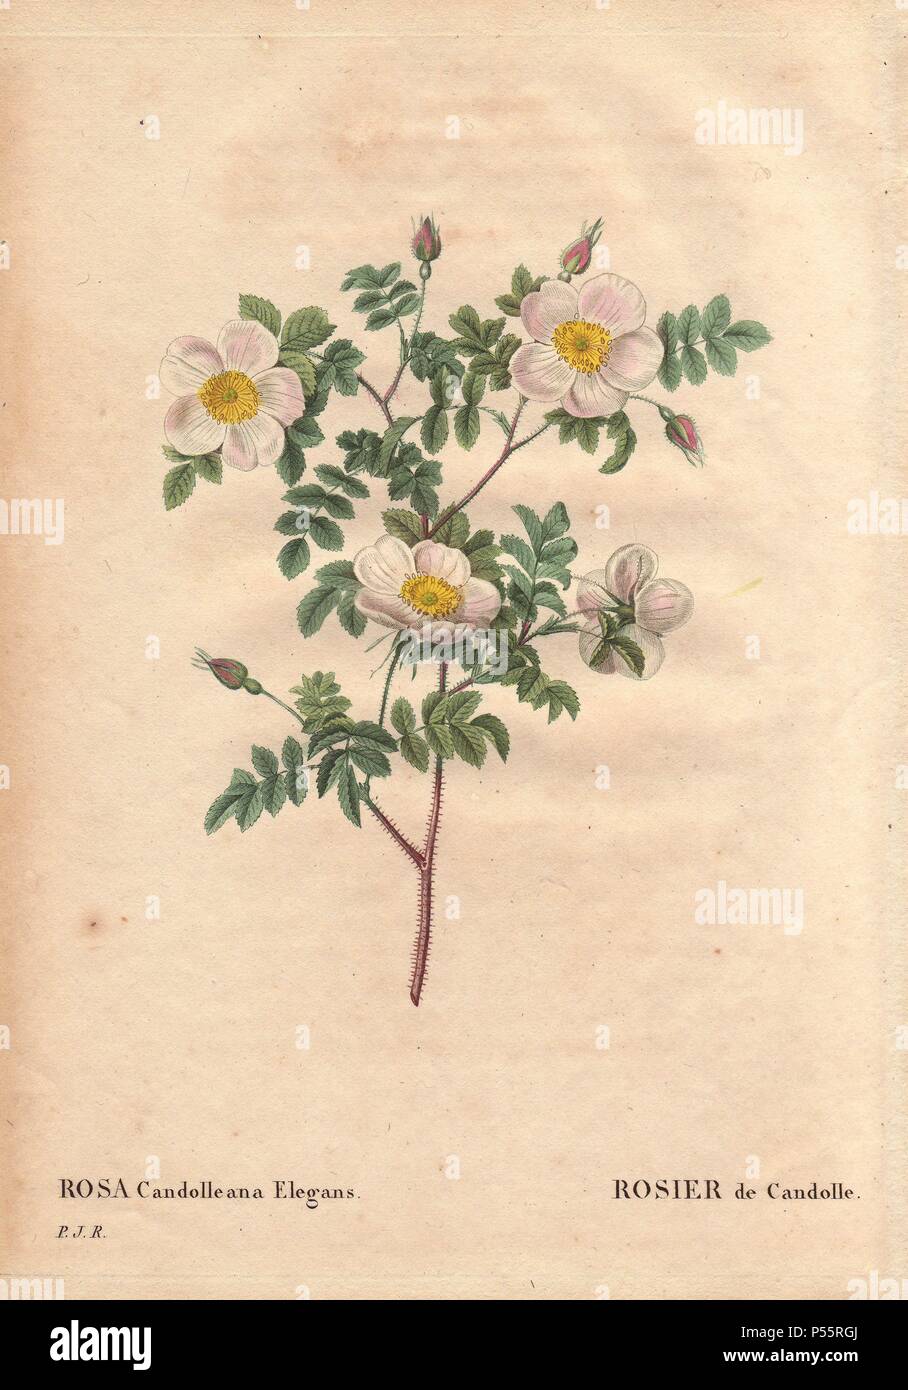 De Candolle's white rose or Rosier de Candolle (Rosa candolleana elegans).. . Wild rose, discovered in Southern Europe and named after De Candolle, 1819.. . Hand-colored, octavo-size stipple copperplate engraving from Pierre Joseph Redoute's 'Les Roses' 1828. Stock Photo